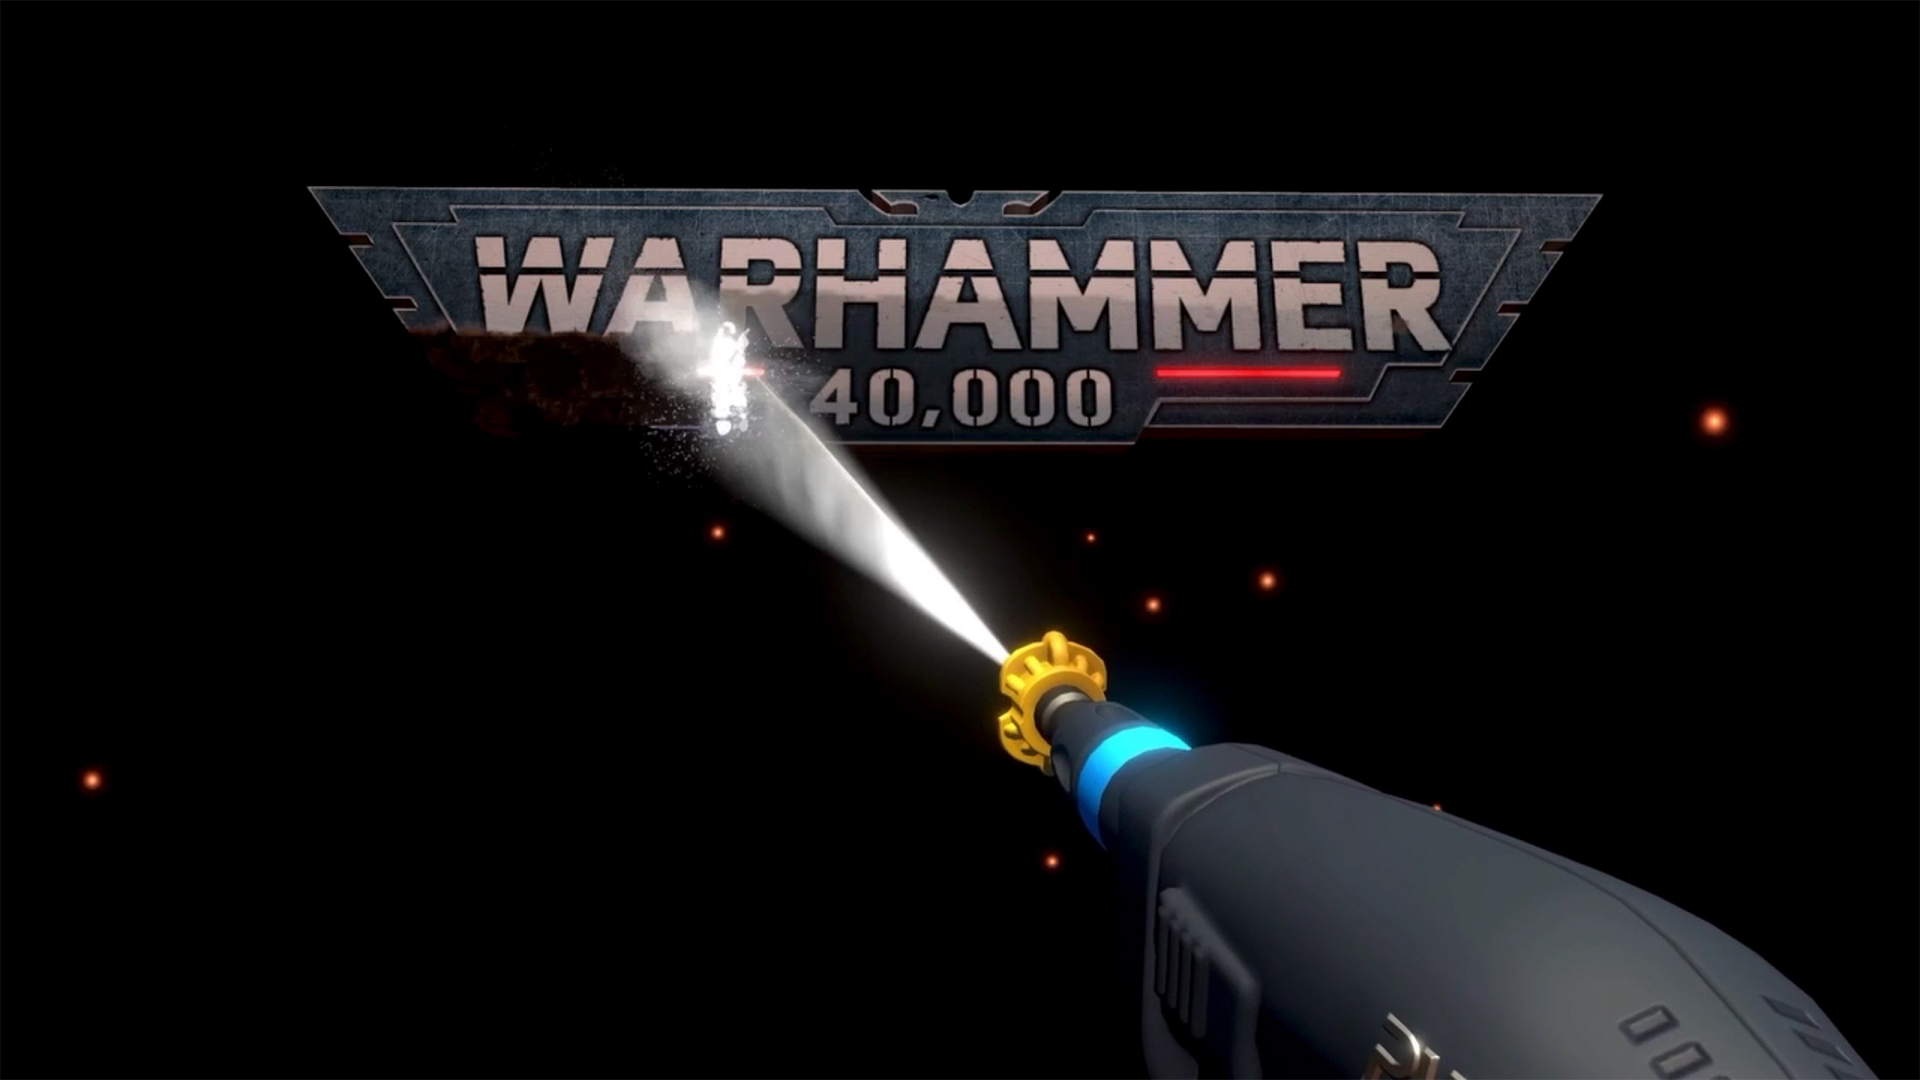 A powerwasher cleaning up the Warhammer 40,000 logo